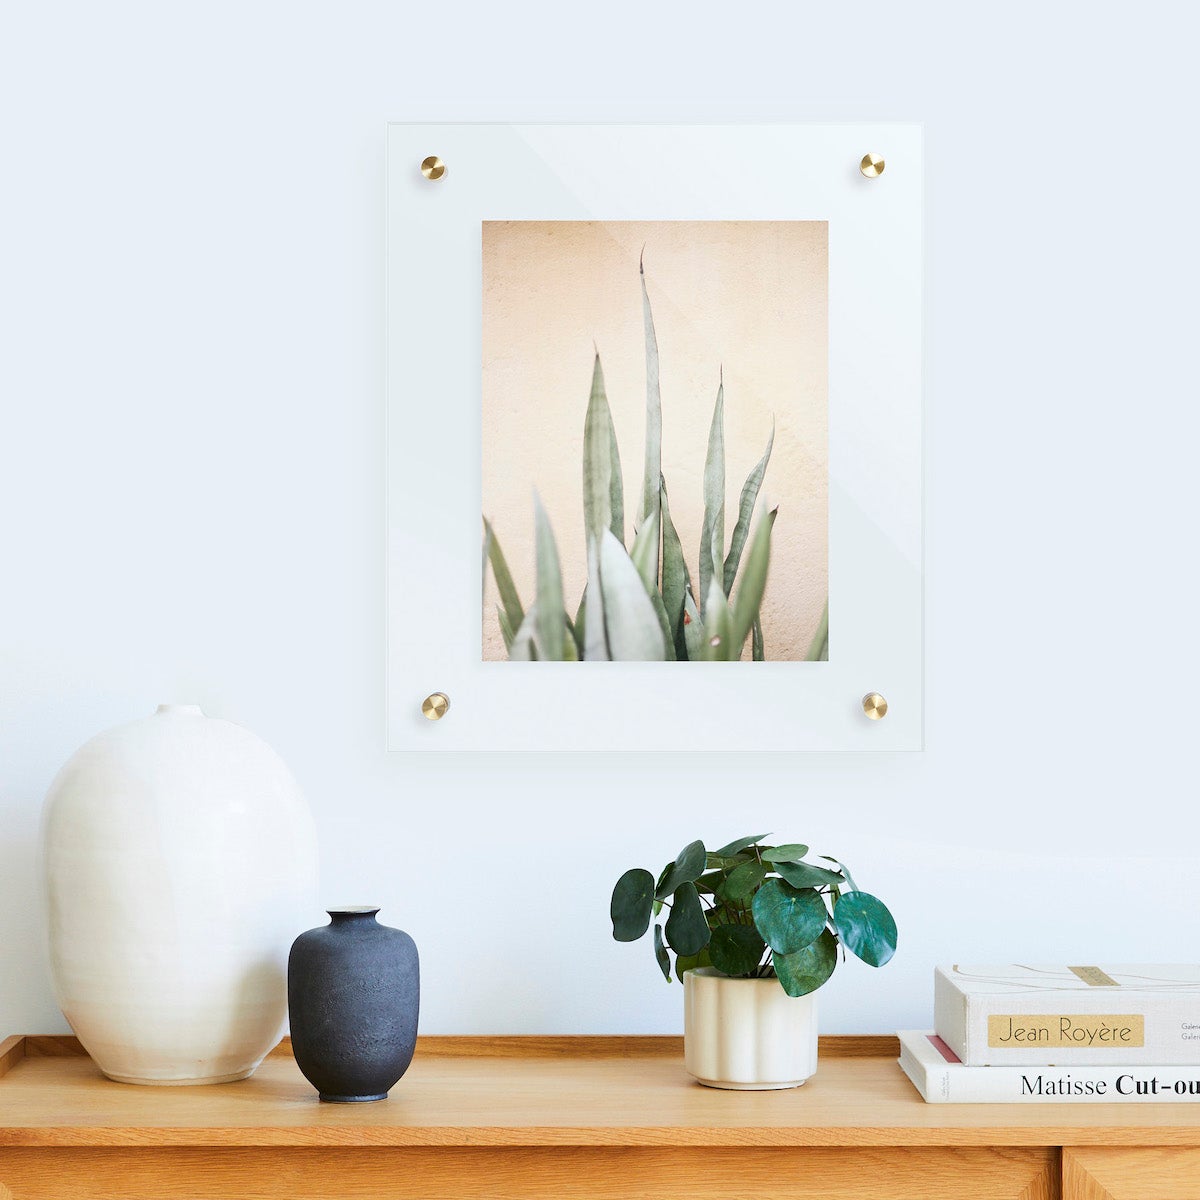 A side table decorated with multiple different plants and an acrylic frame on the wall with a plant in the photo as well.